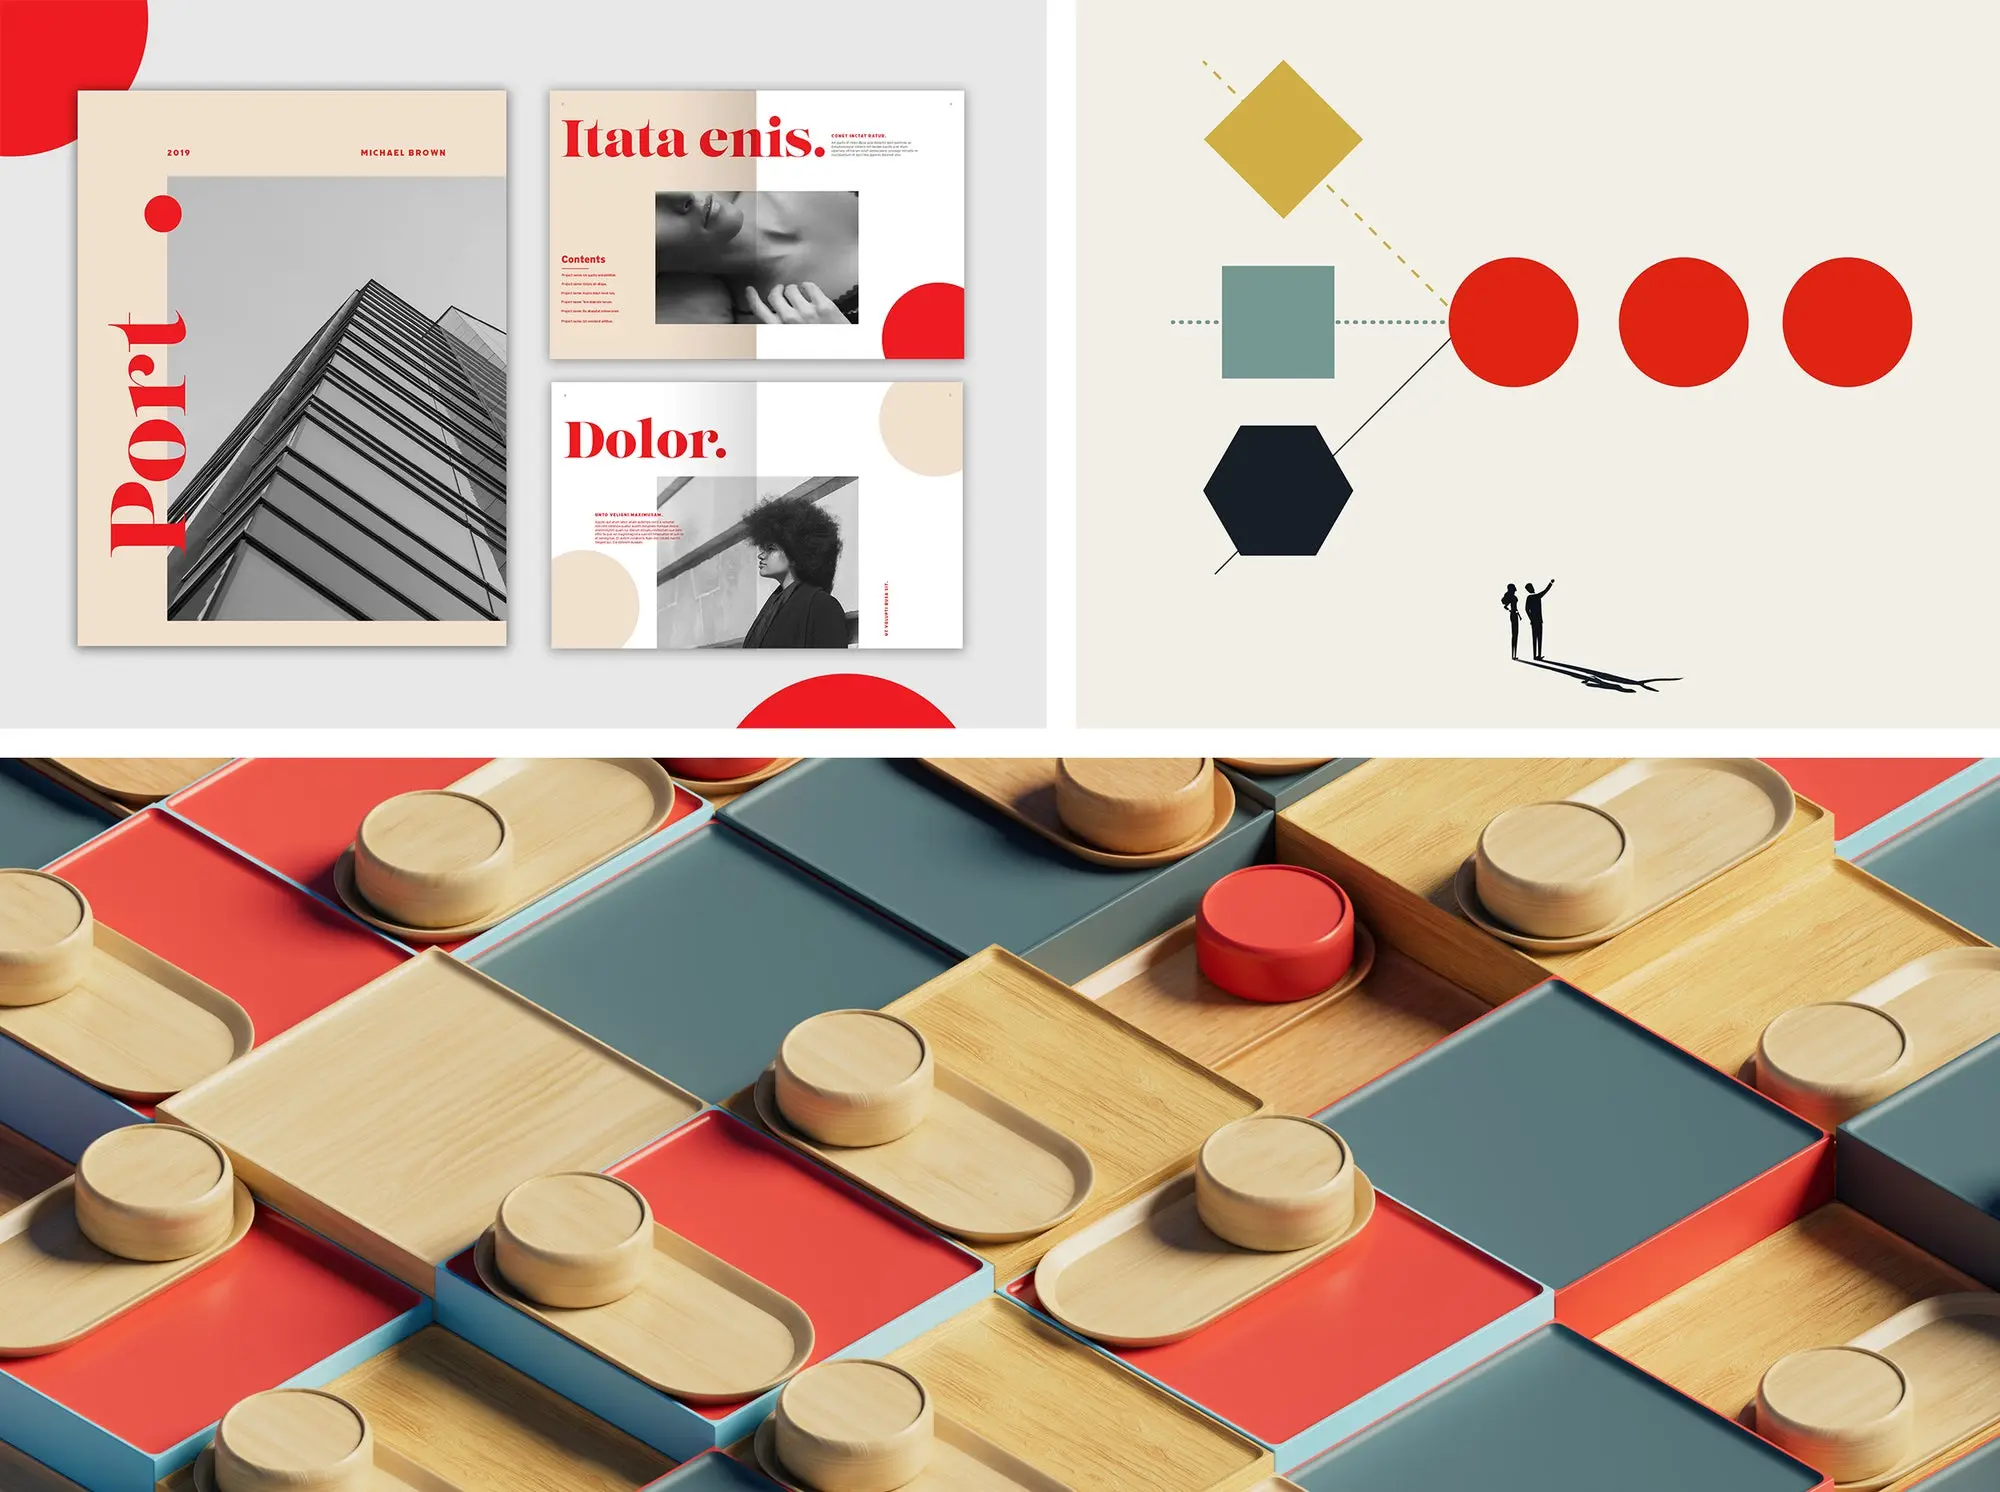 A collage of 3 images in green, red and wood tones using a Bauhausian emphasis on geometrics.